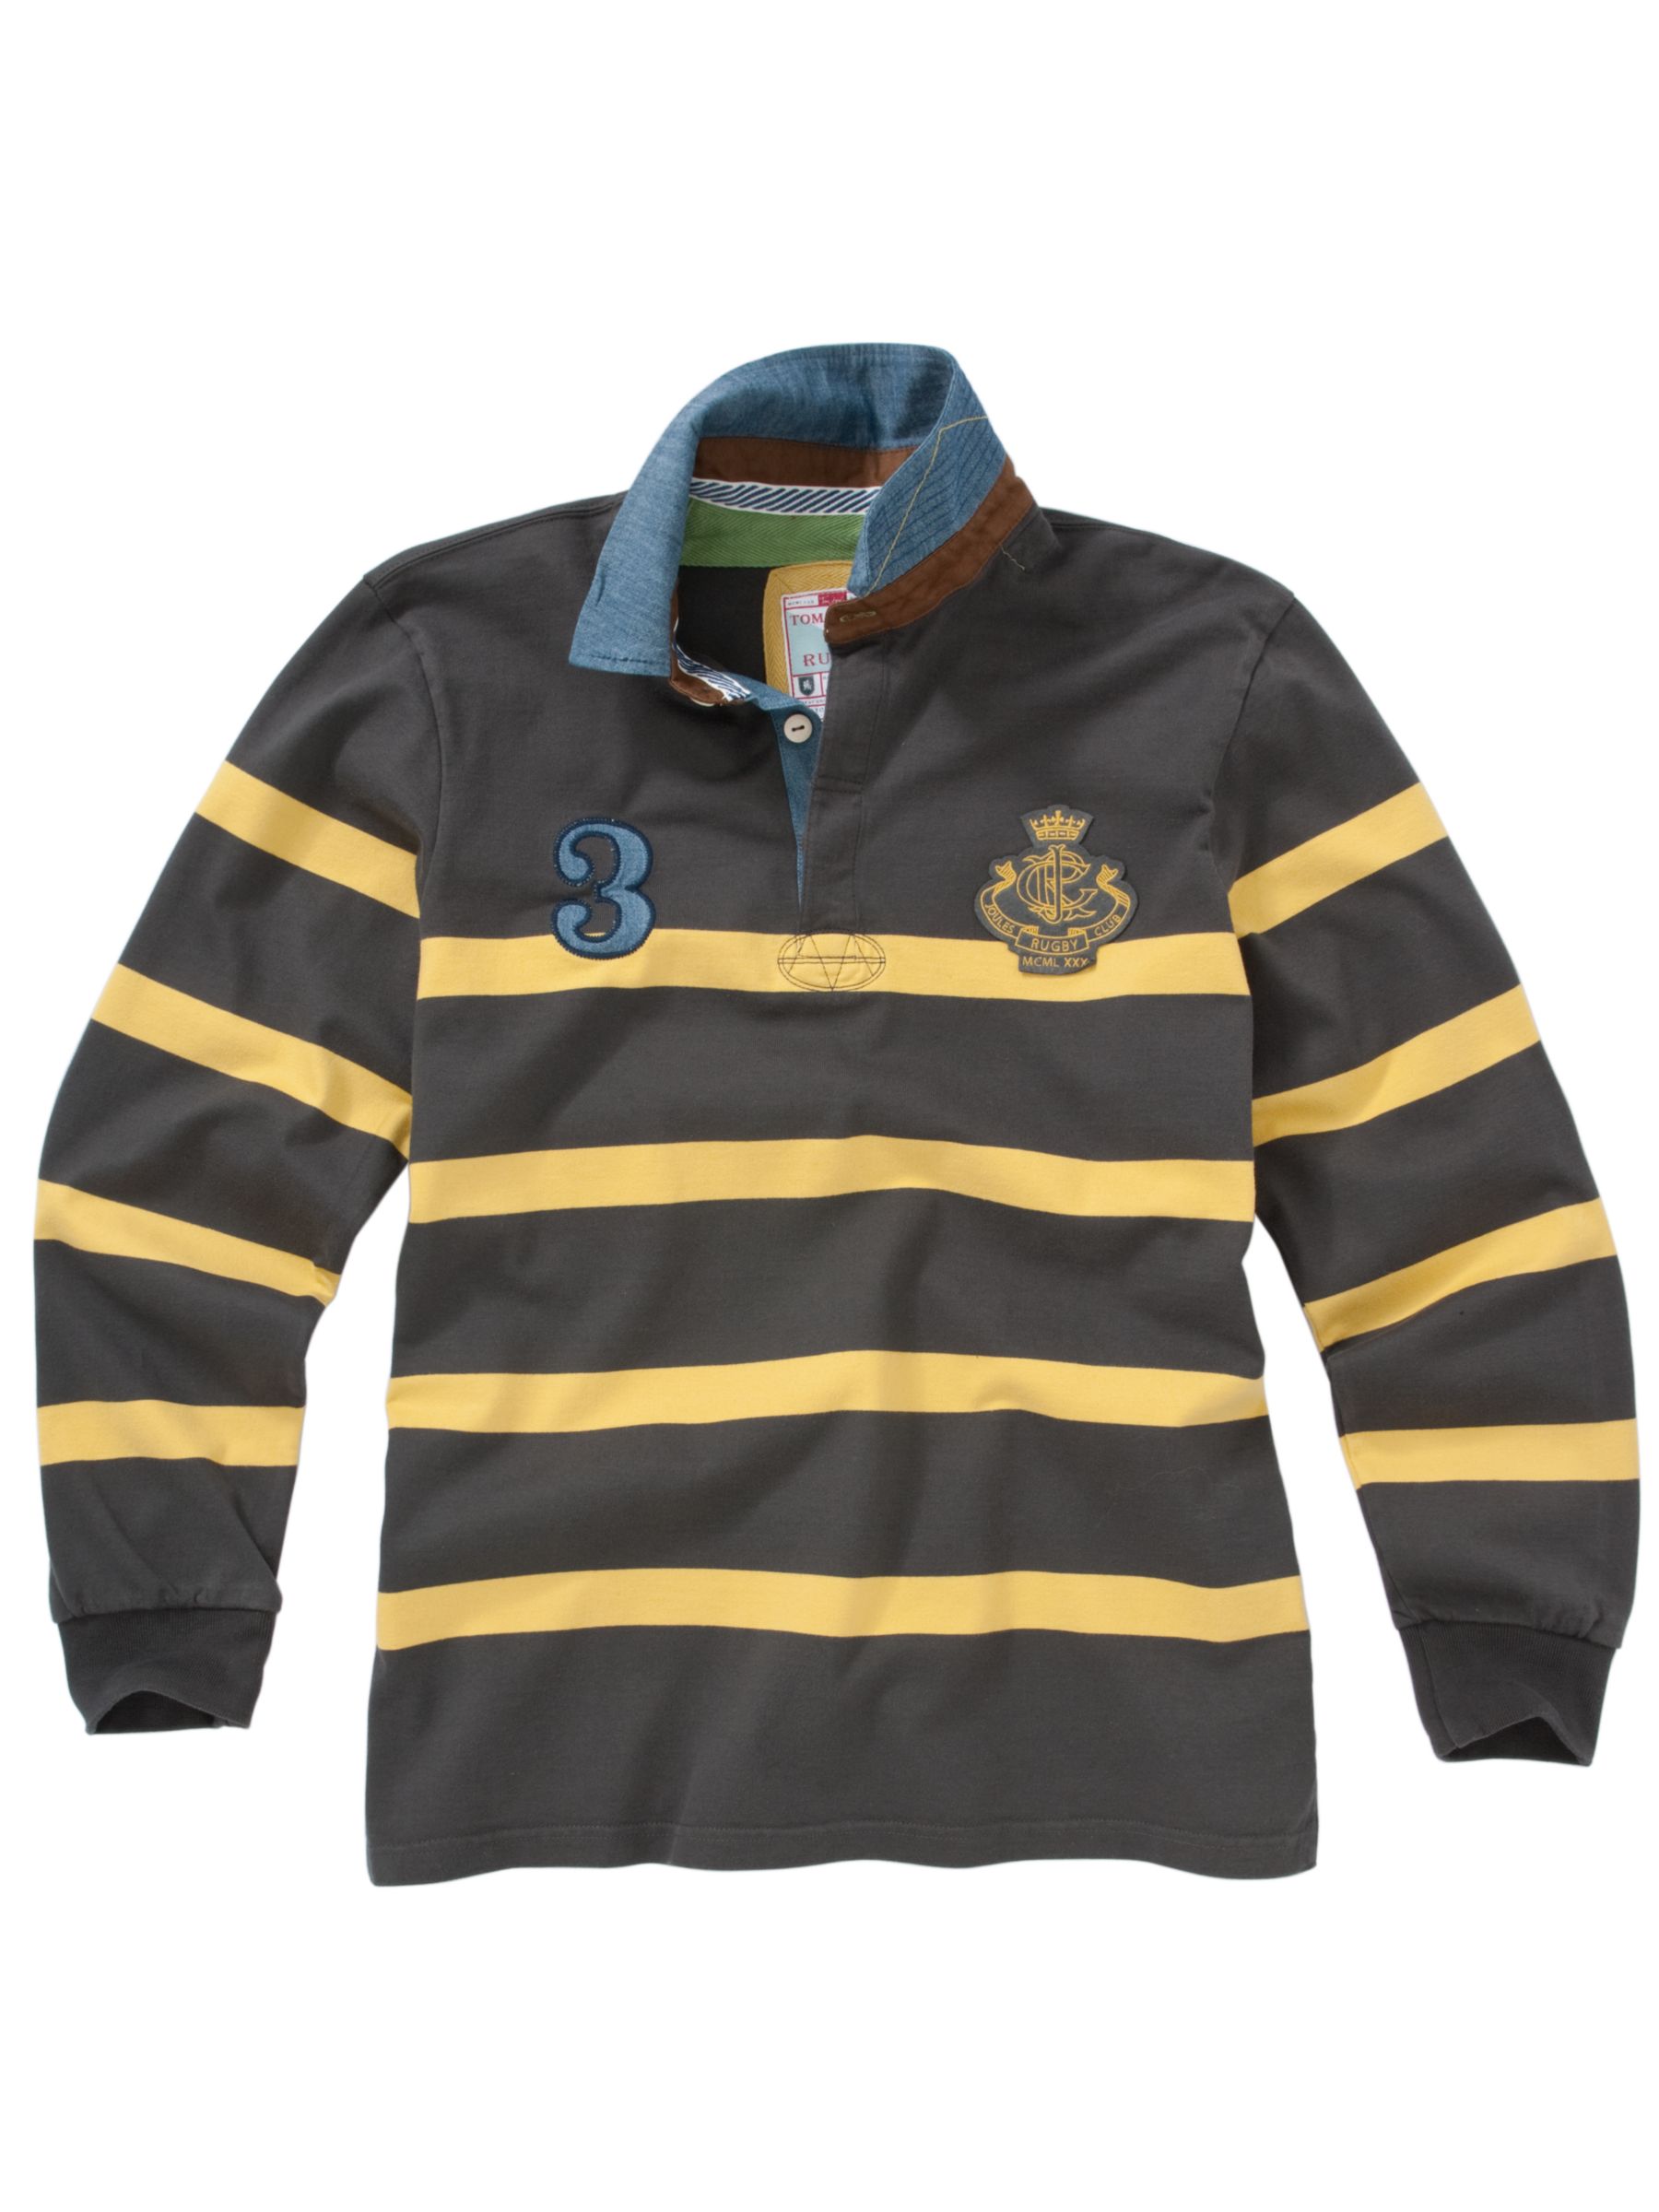 Joules Stamford Stripe Rugby Shirt, Cream